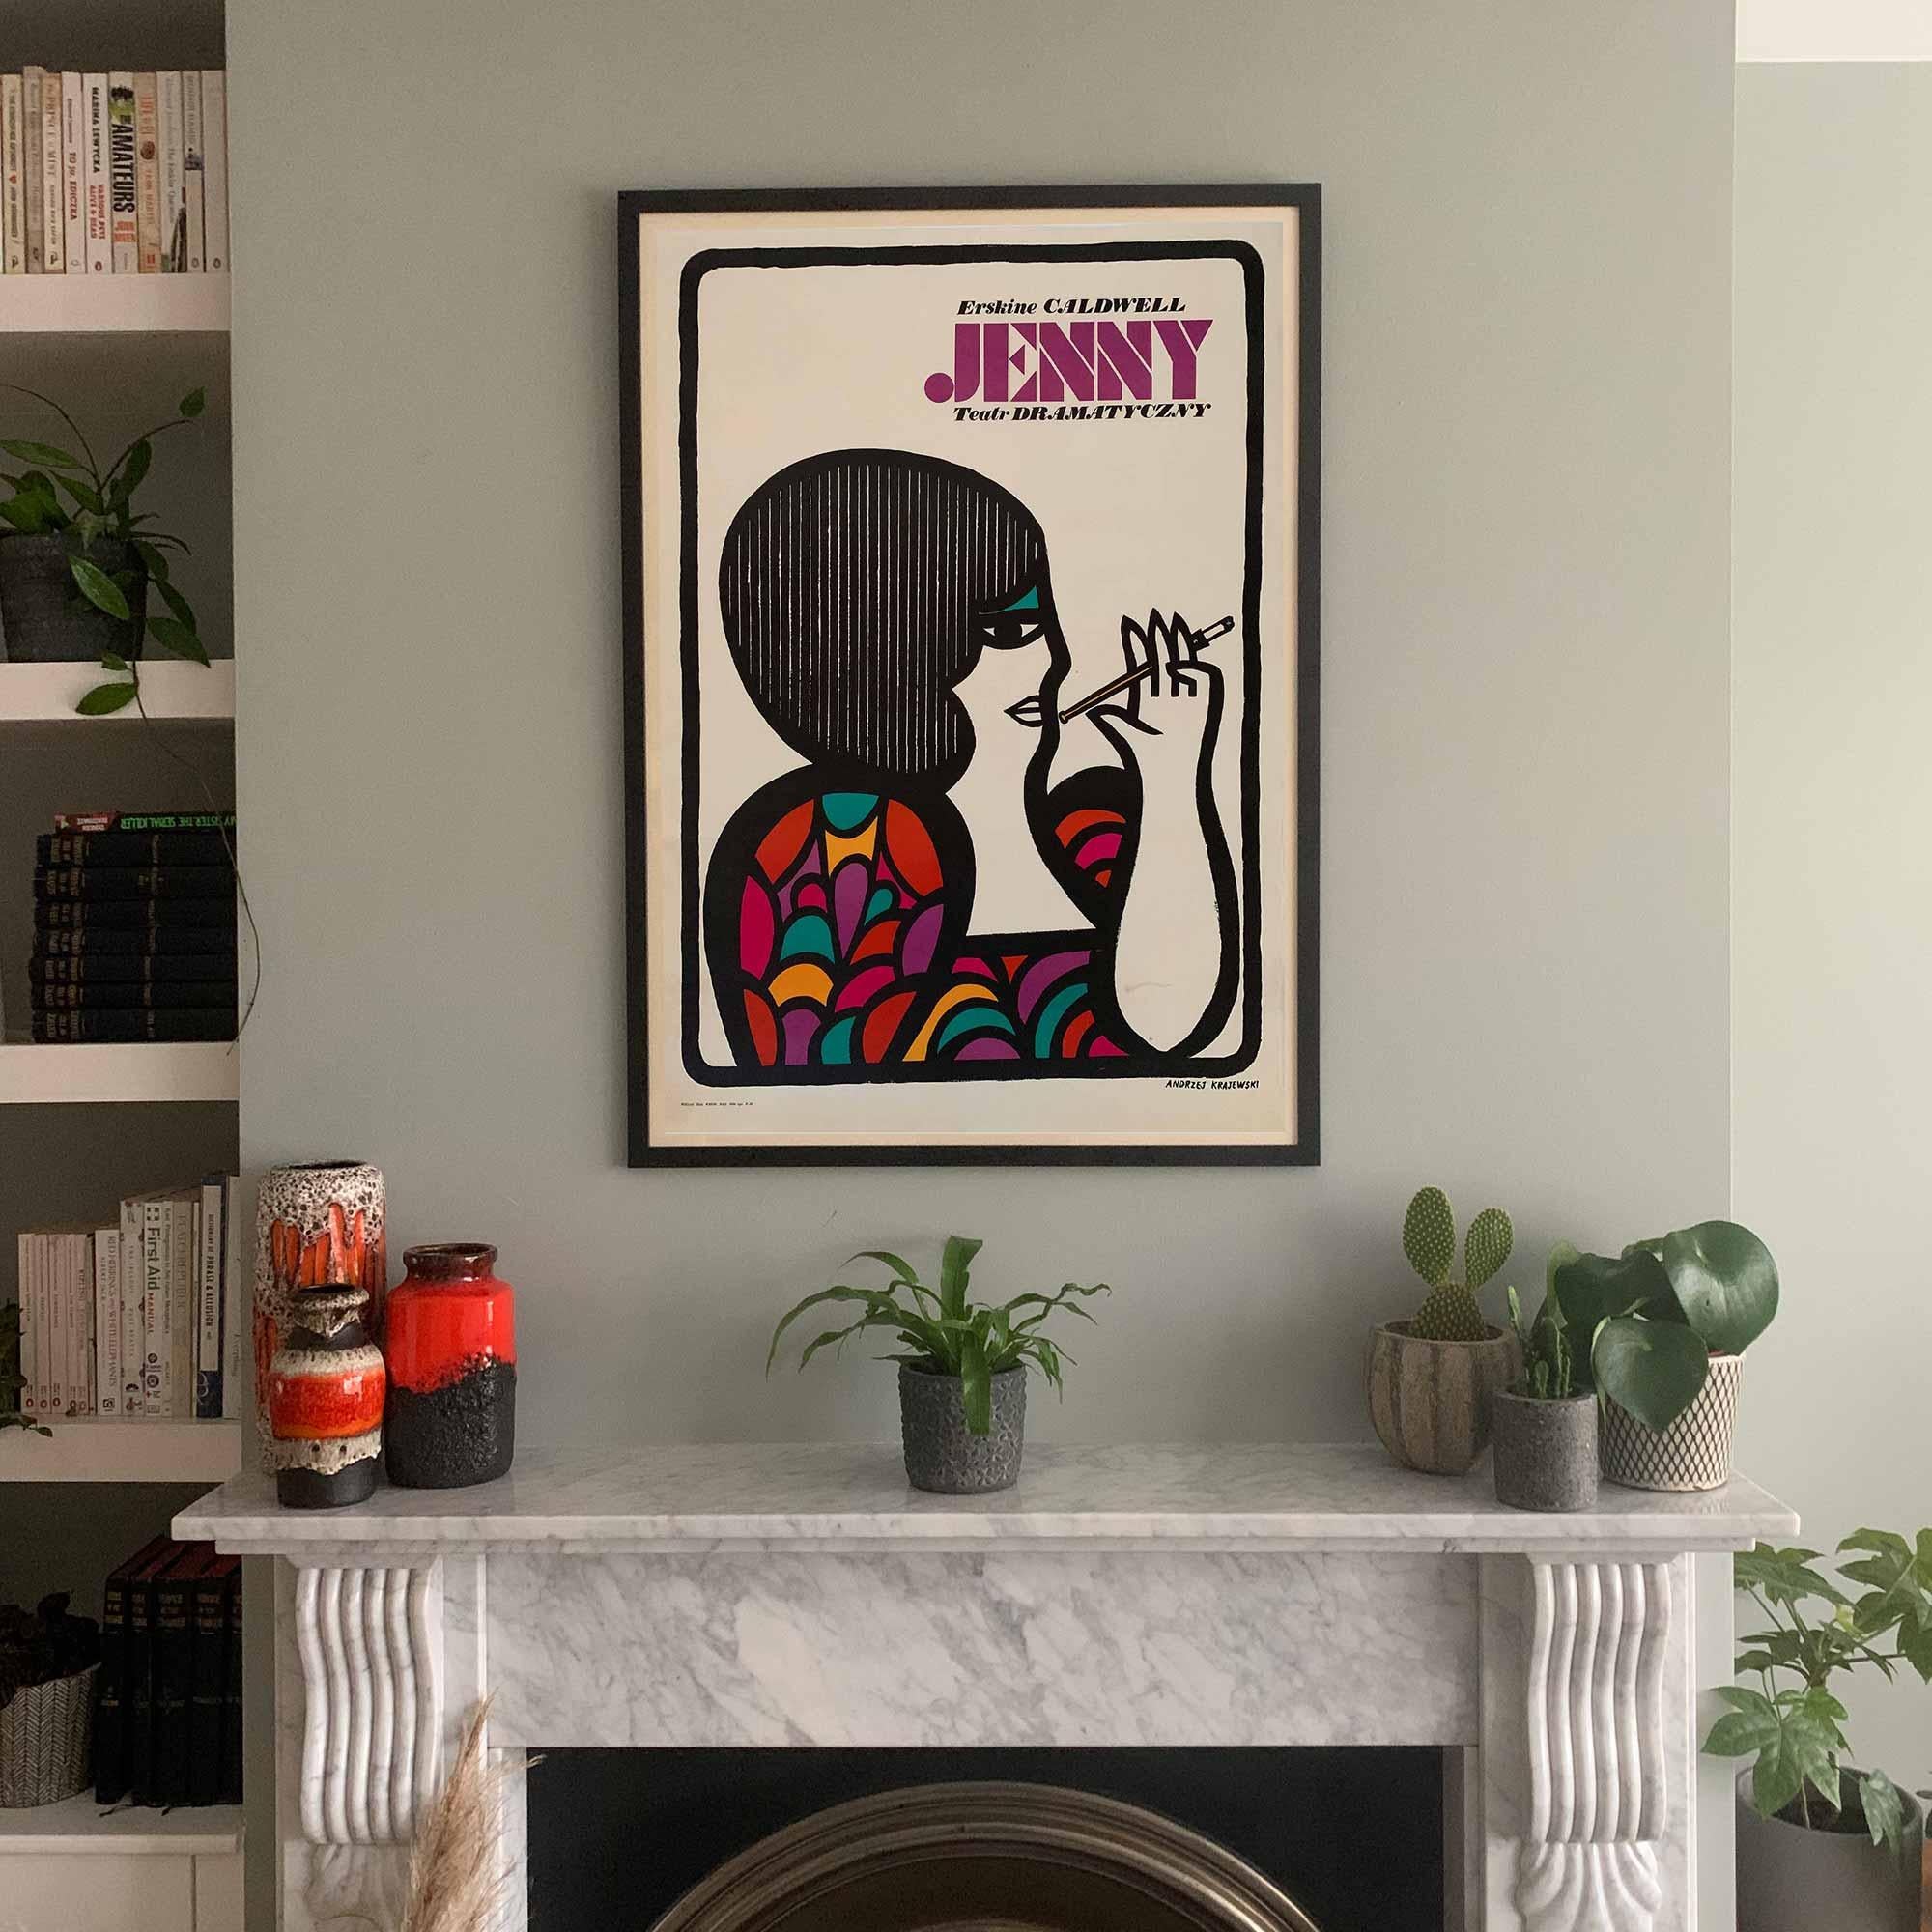 This original 1968 Polish theatre poster ‘Jenny’ by Andrzej Krajewski is just perfection. And beyond perfection if your name is Jenny :). She’s a wonderful example of Andrzej Krajewski’s characterful and naive illustrative style, and she’s oozing